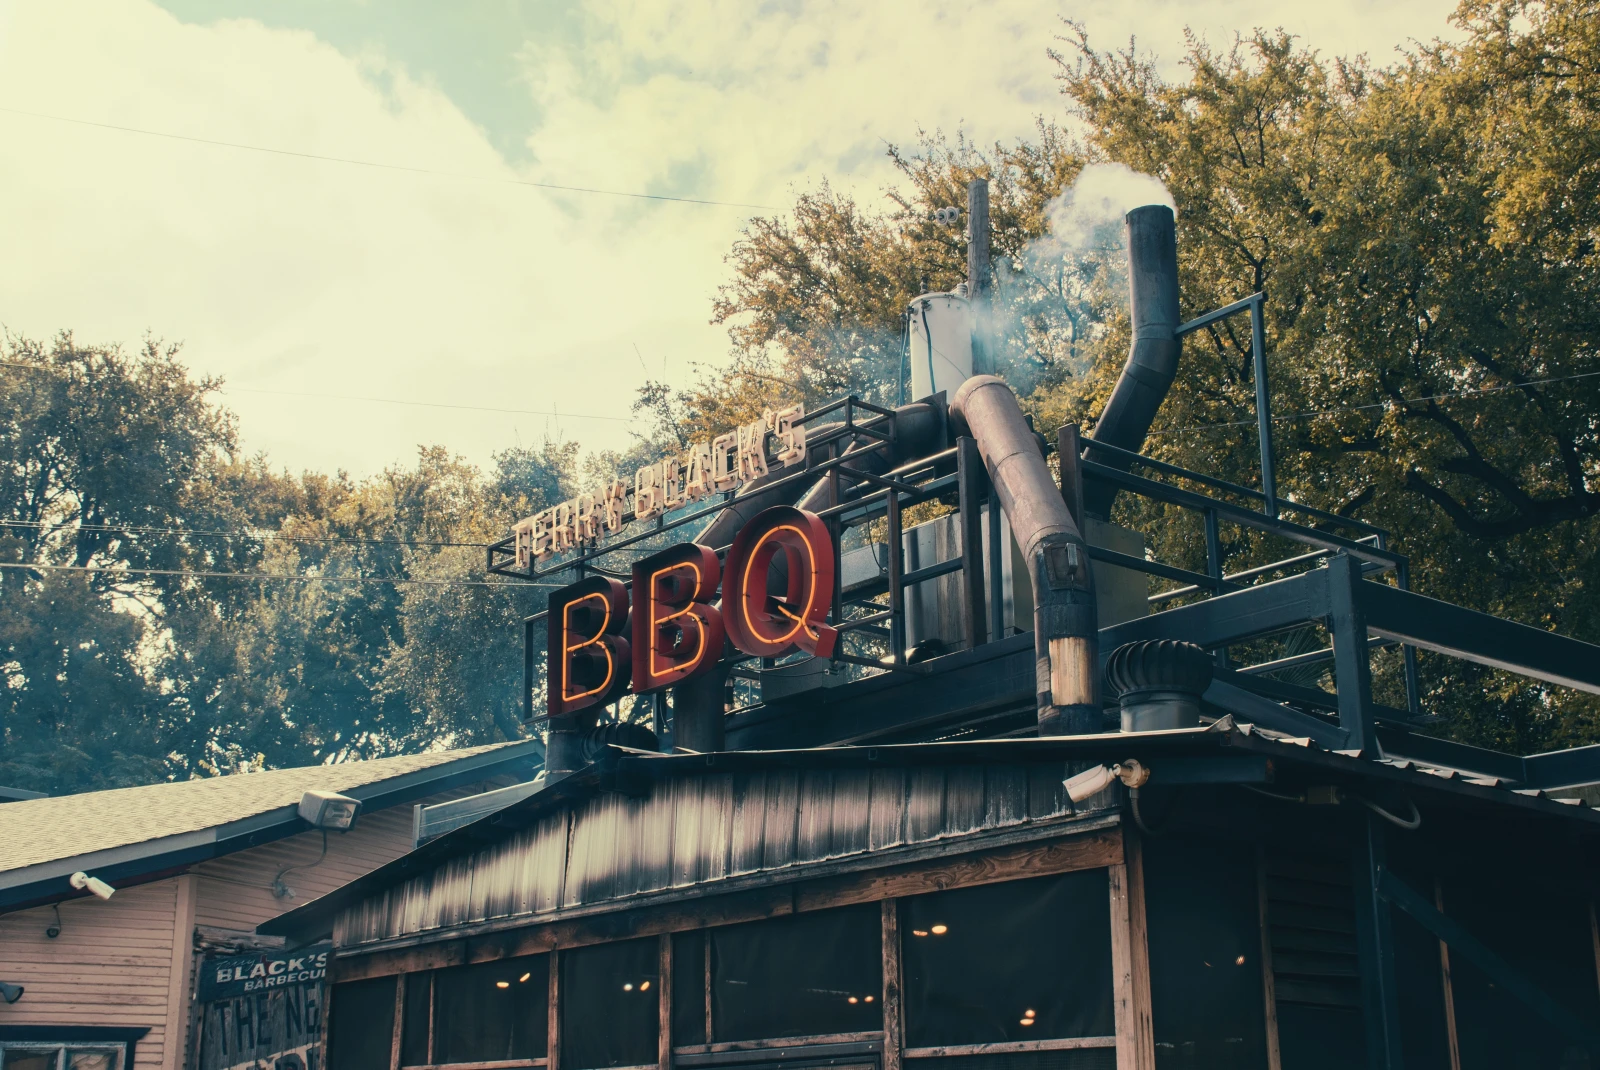 BBQ place in Austin                                                                                                                                                                                                                                                                                                                                                                                                                                                                   